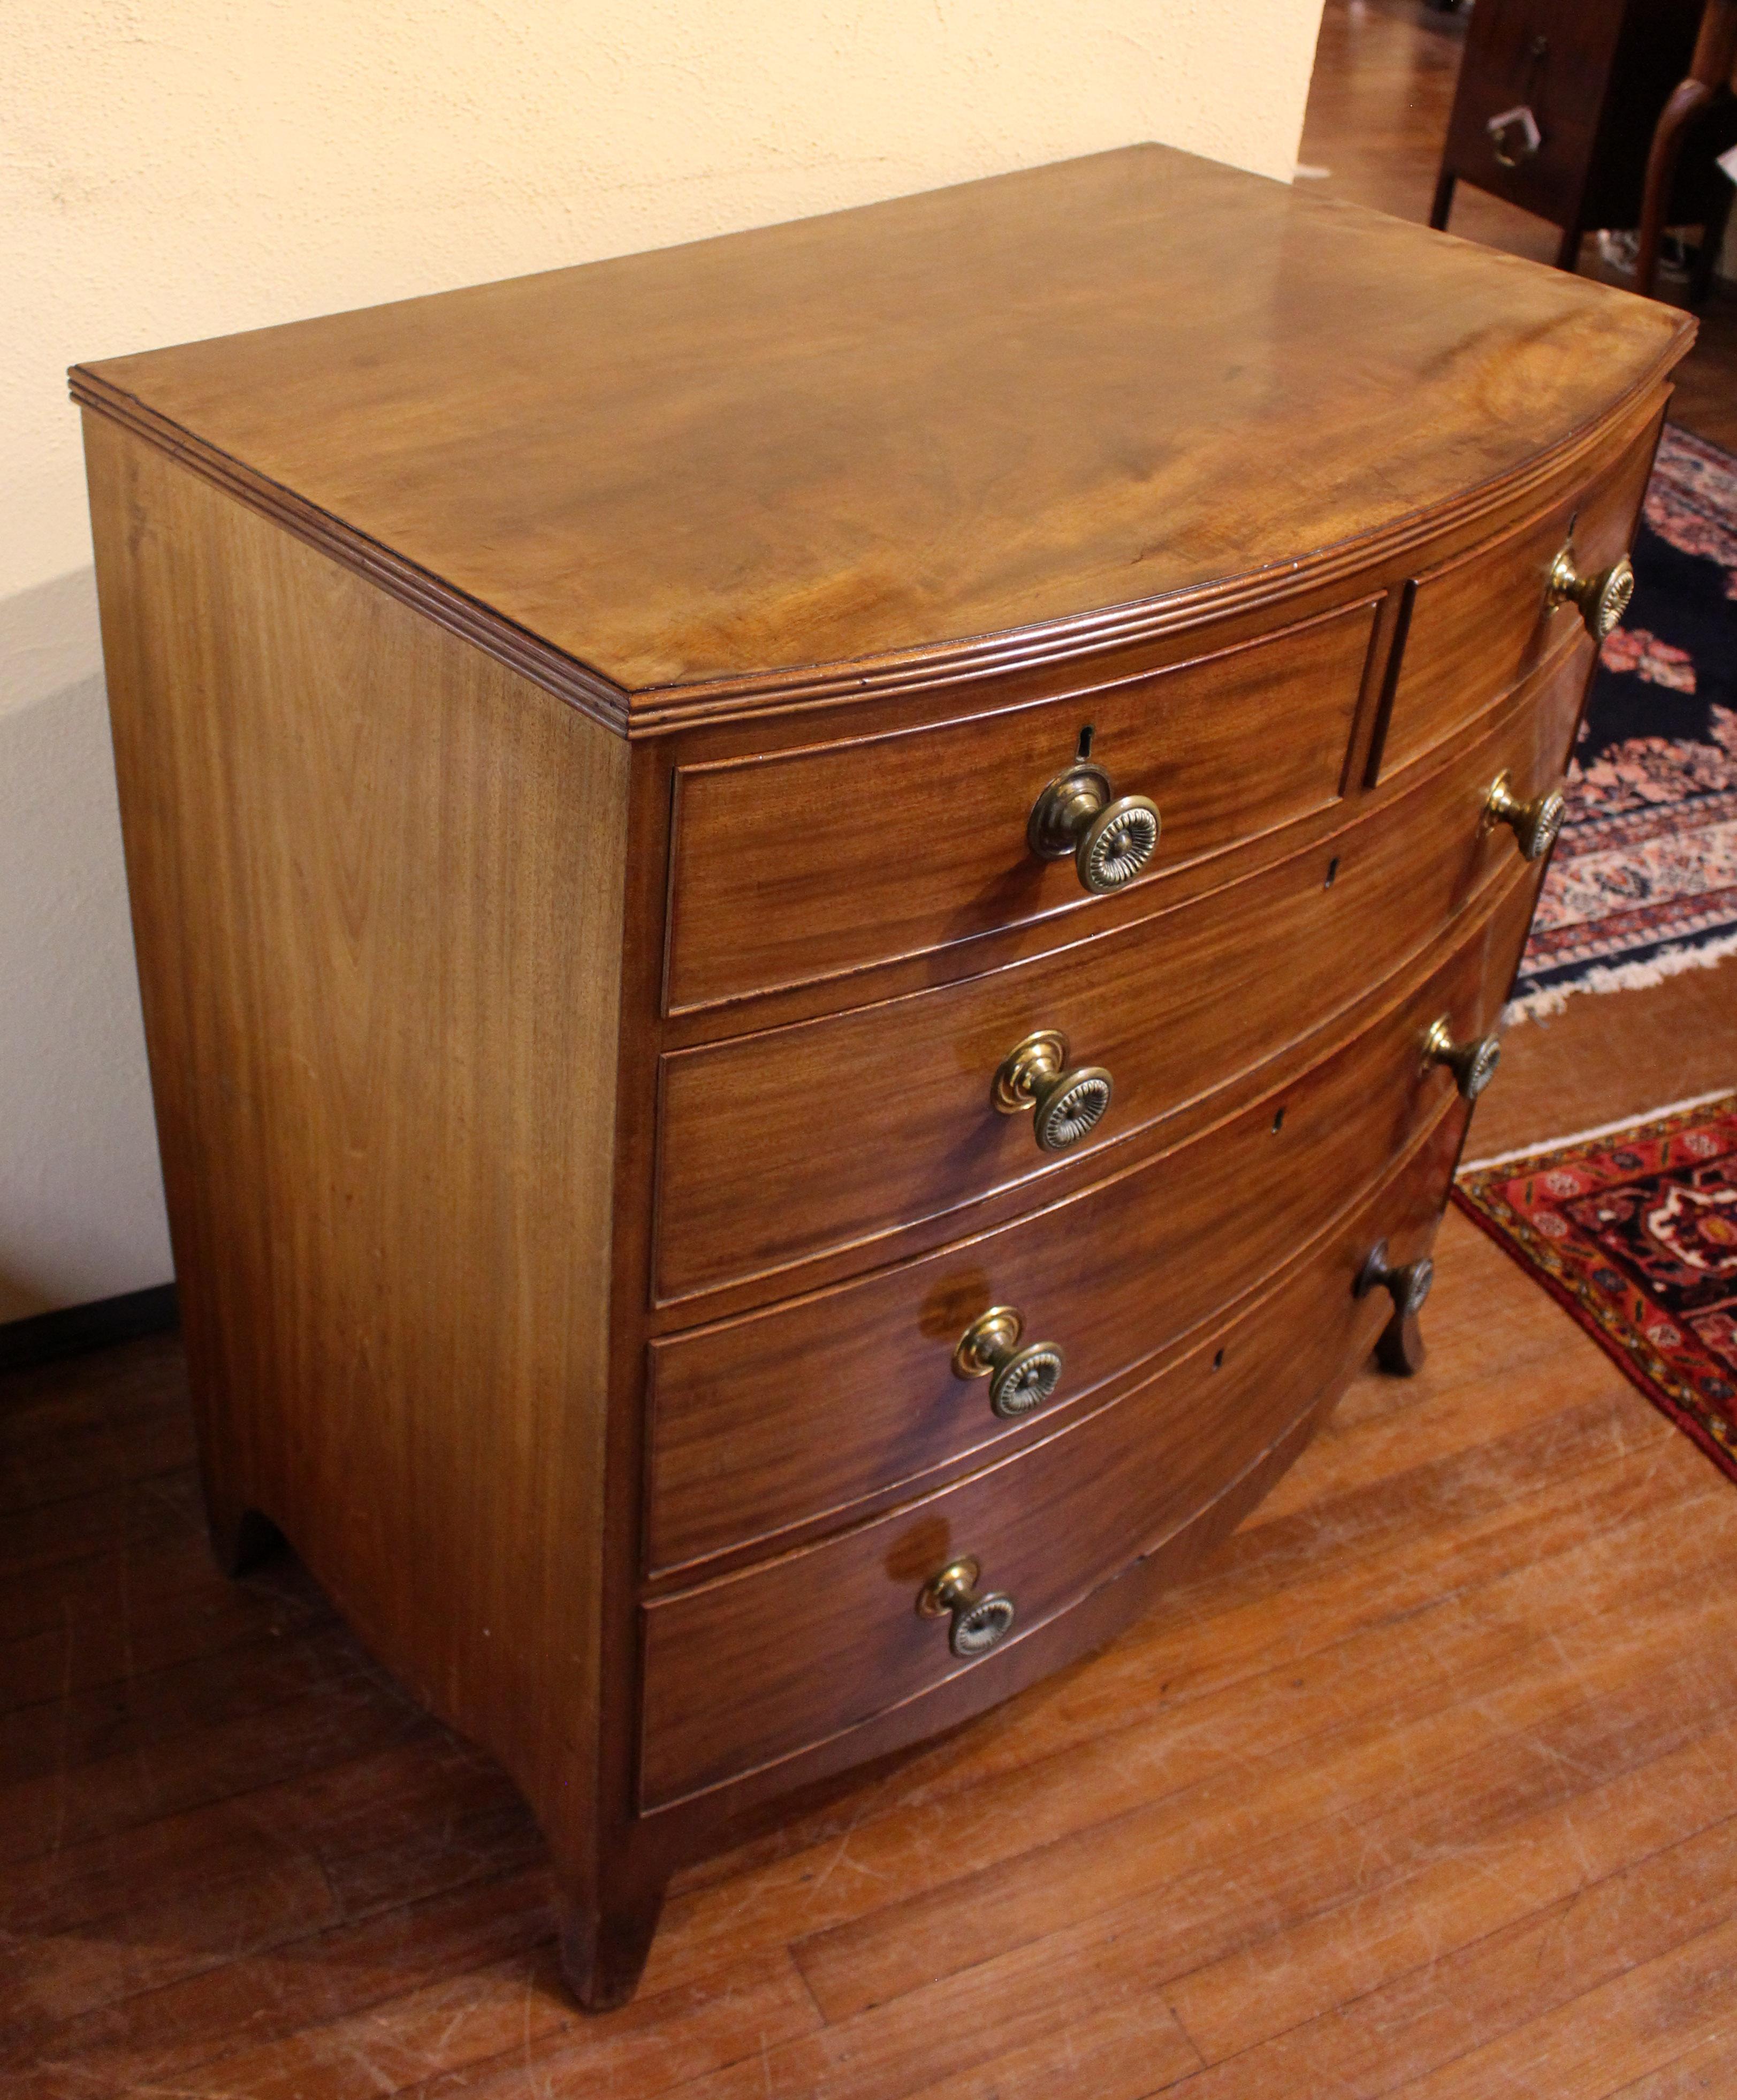 Regency Circa 1800 English Bowfront Chest of Drawers